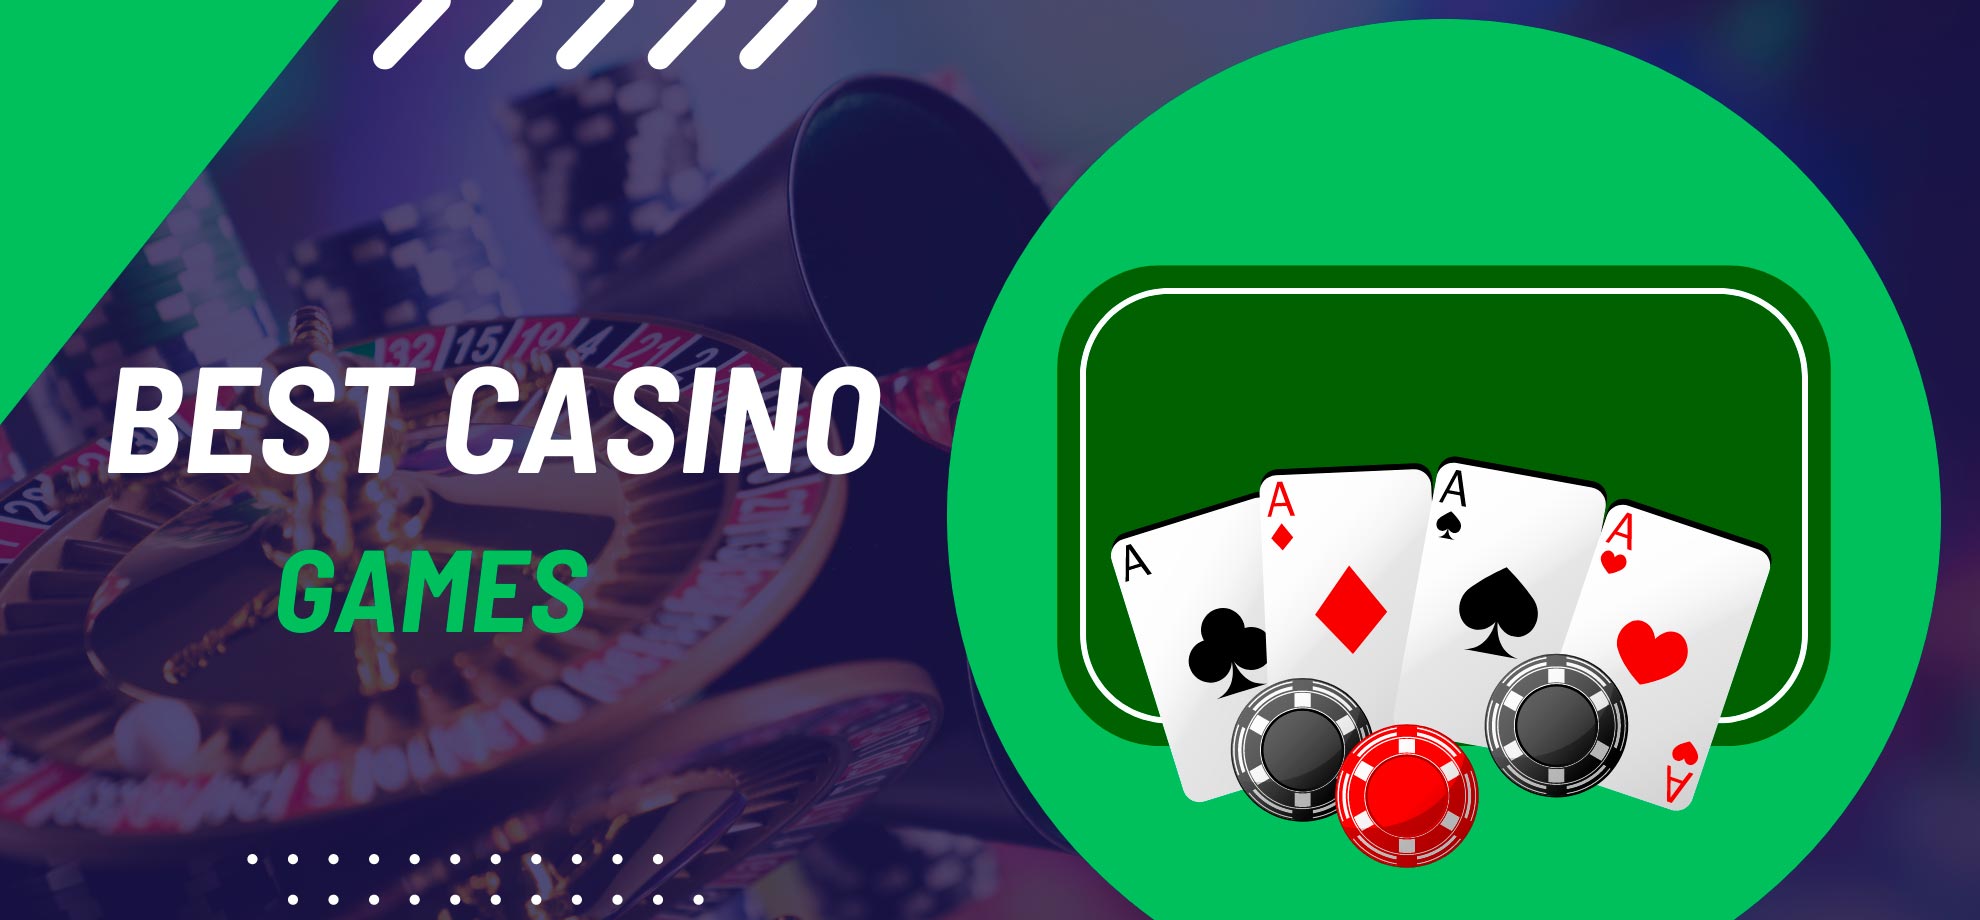 Best Casino Games for Indian Players